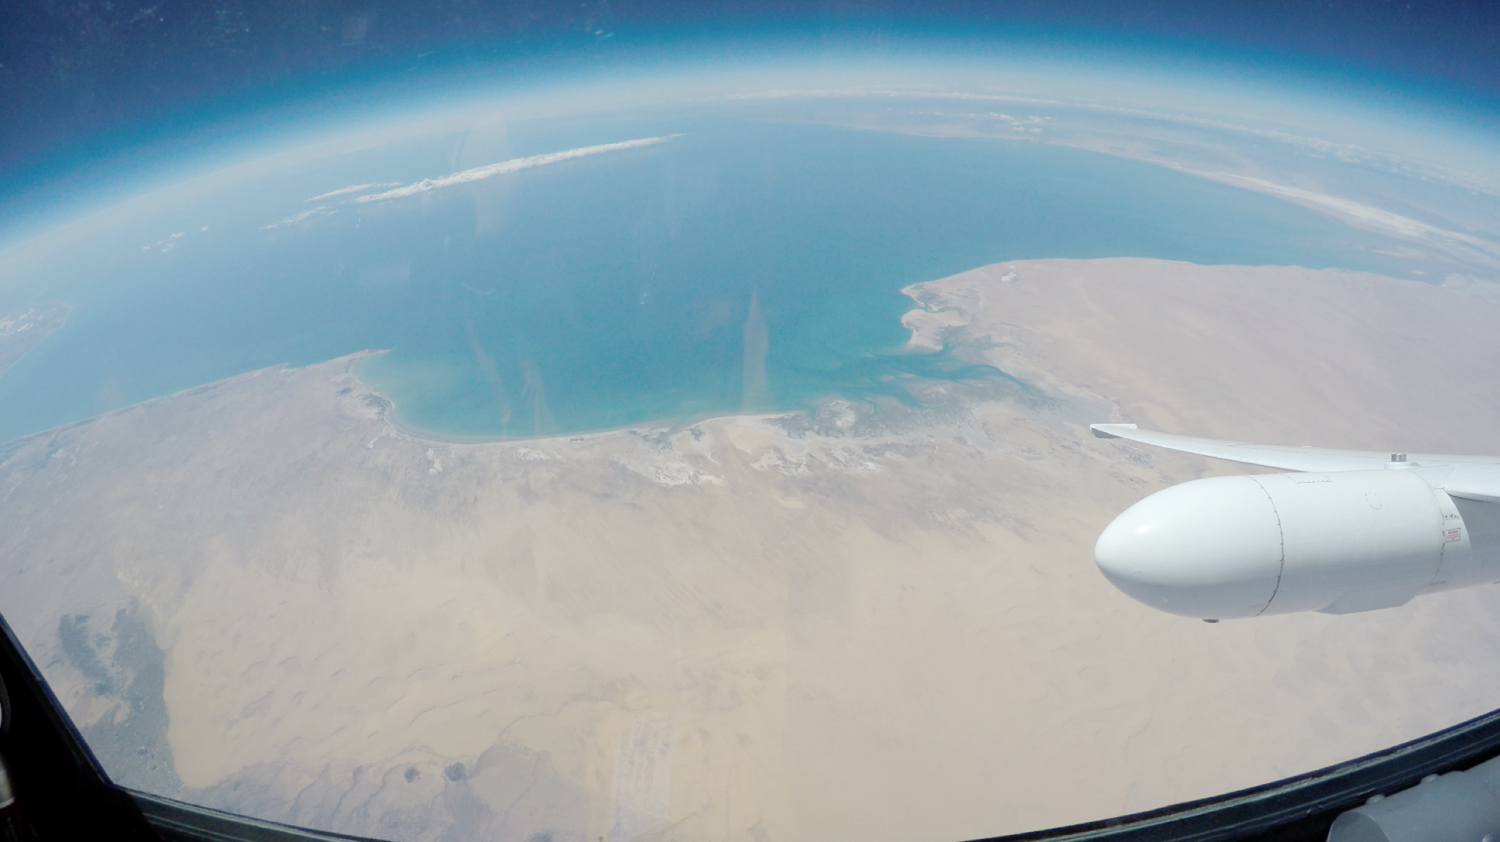 view from plane showing desert and part of a wing